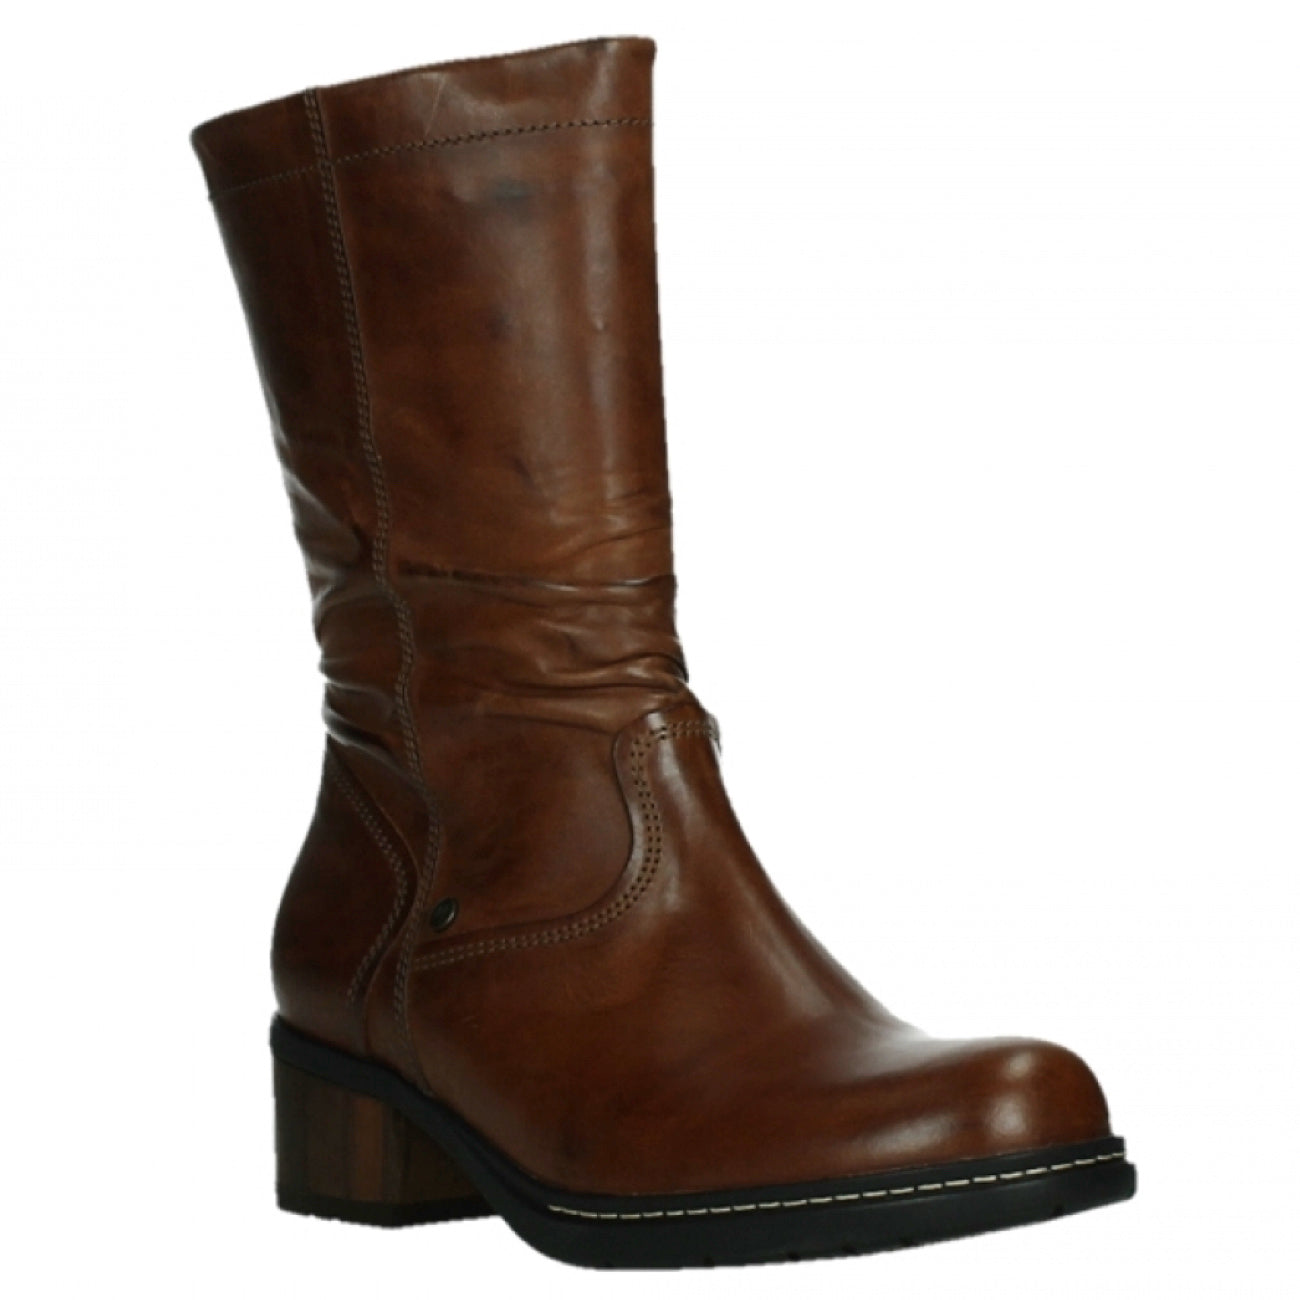 Wolky, Edmonton, Boots, Soft Wax Leather, Cognac Boots Wolky Cognac 37 